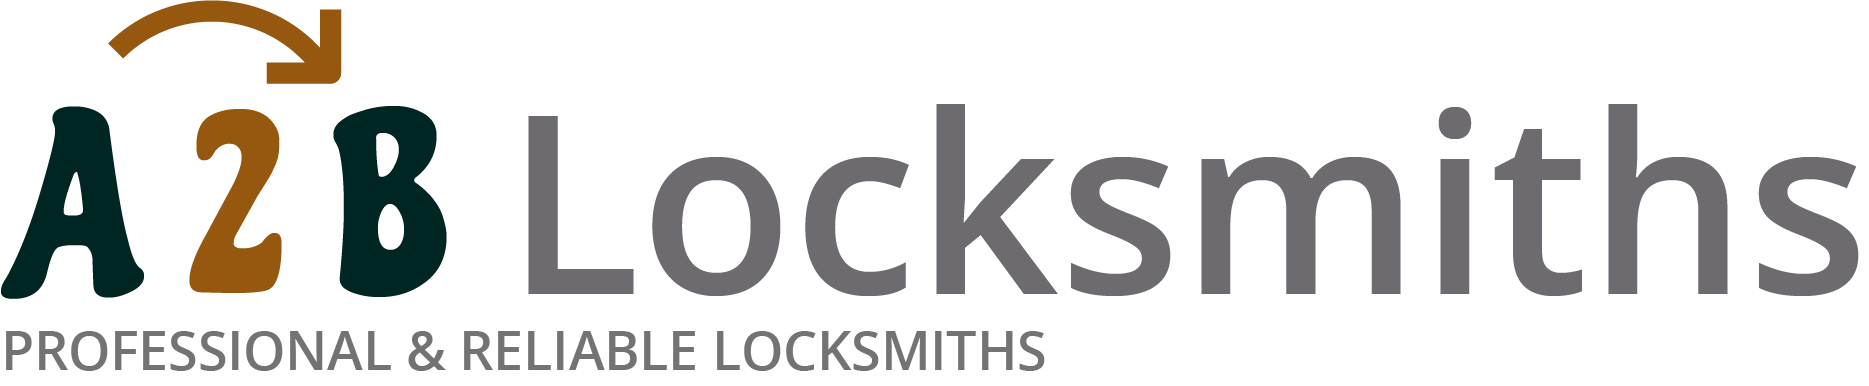 If you are locked out of house in Cradley Heath, our 24/7 local emergency locksmith services can help you.